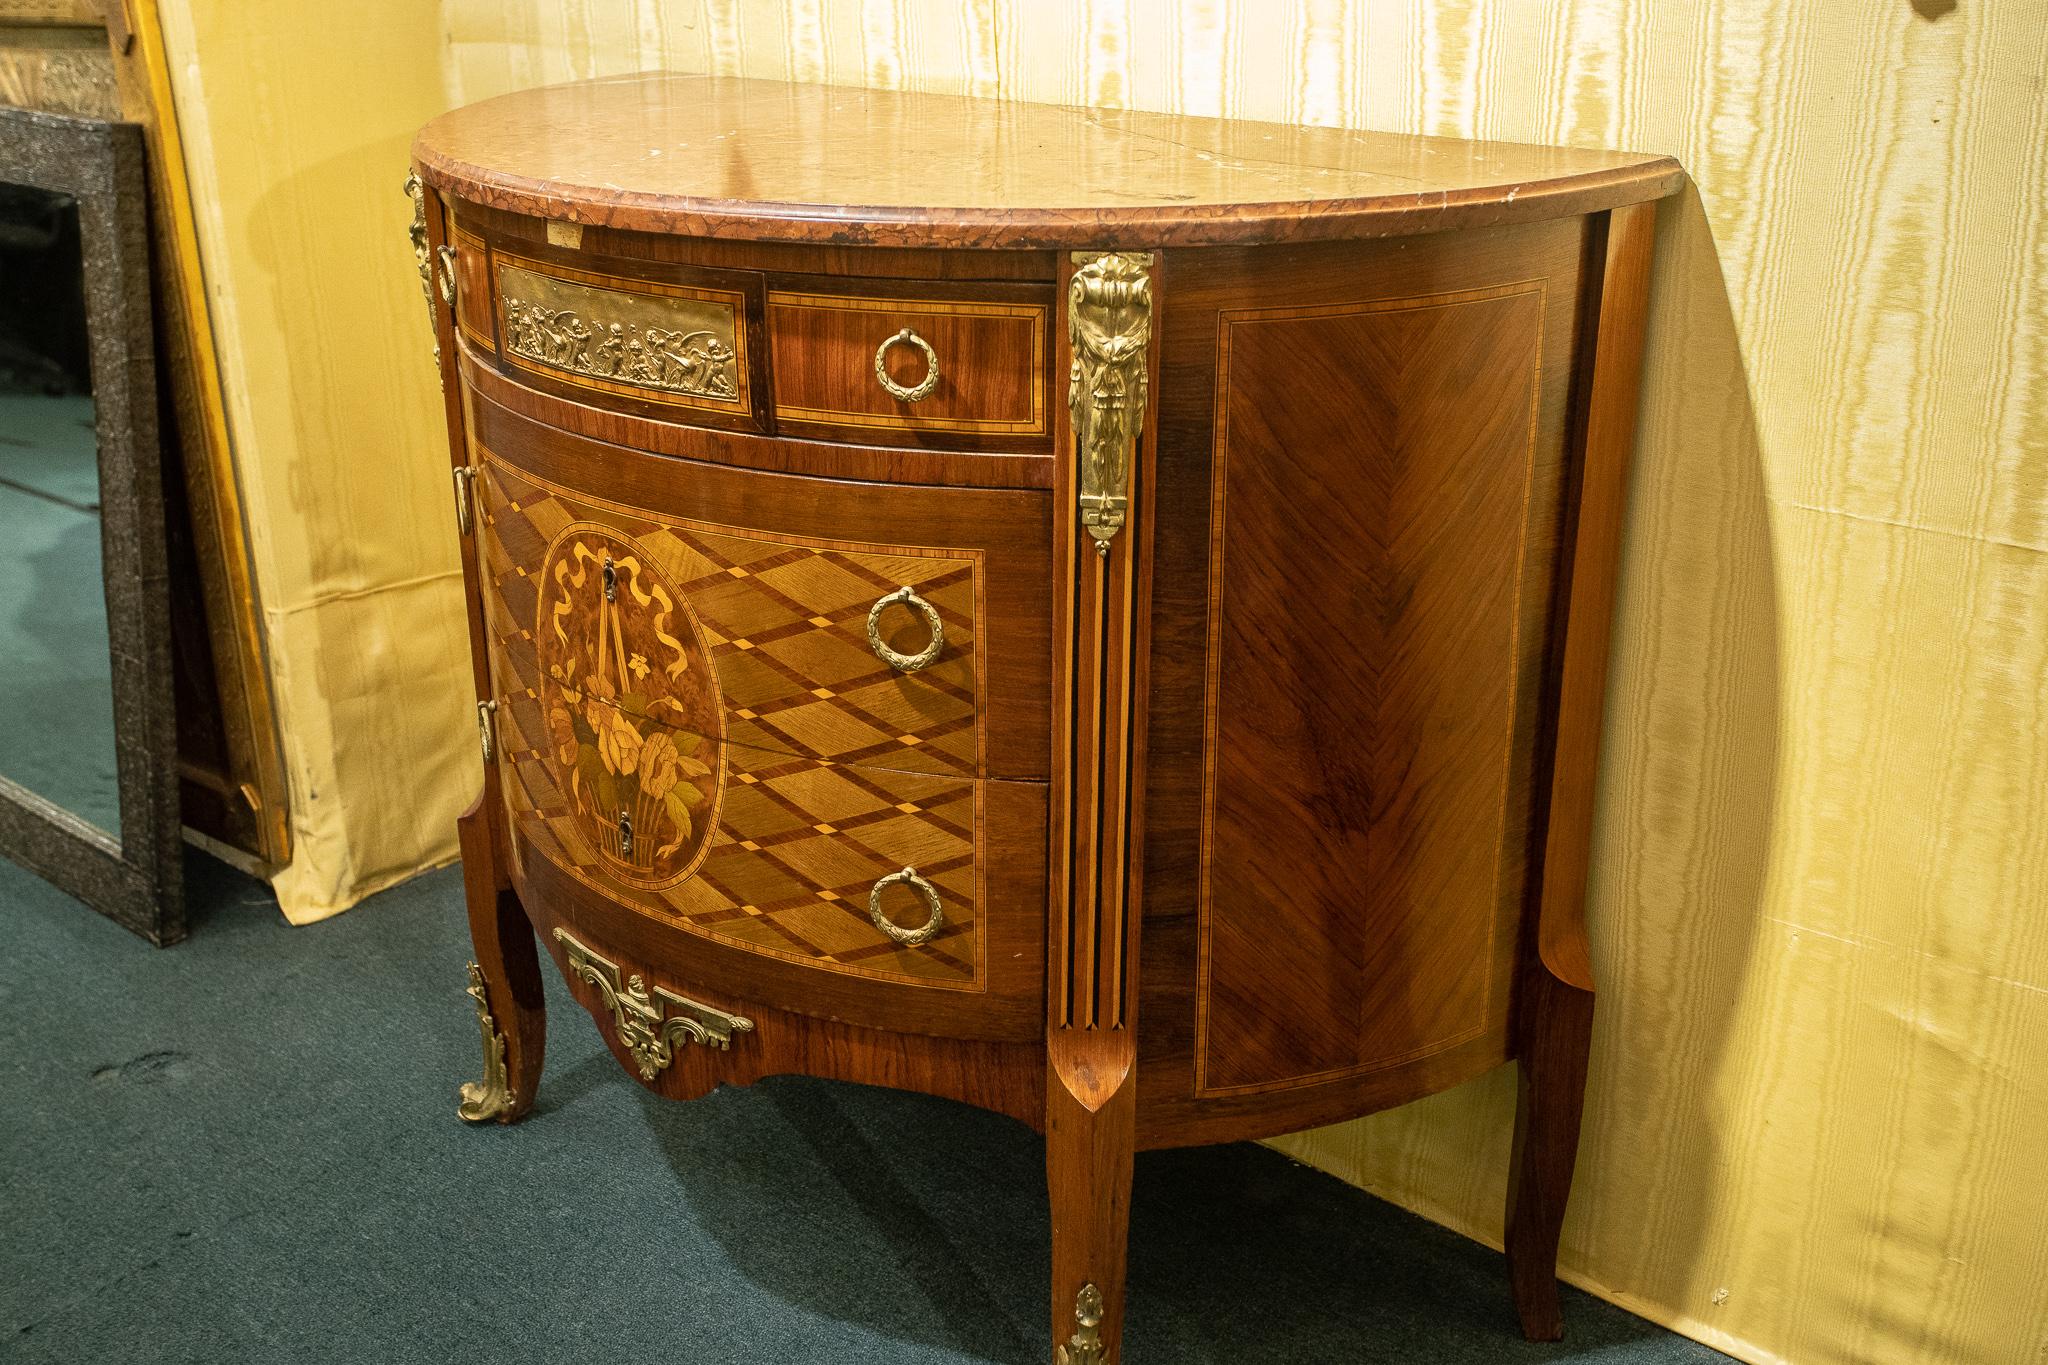 19th century French Louis XVI style demilune kingwood, marquetry and parquetry inlaid bronze-mounted marble-top commode.